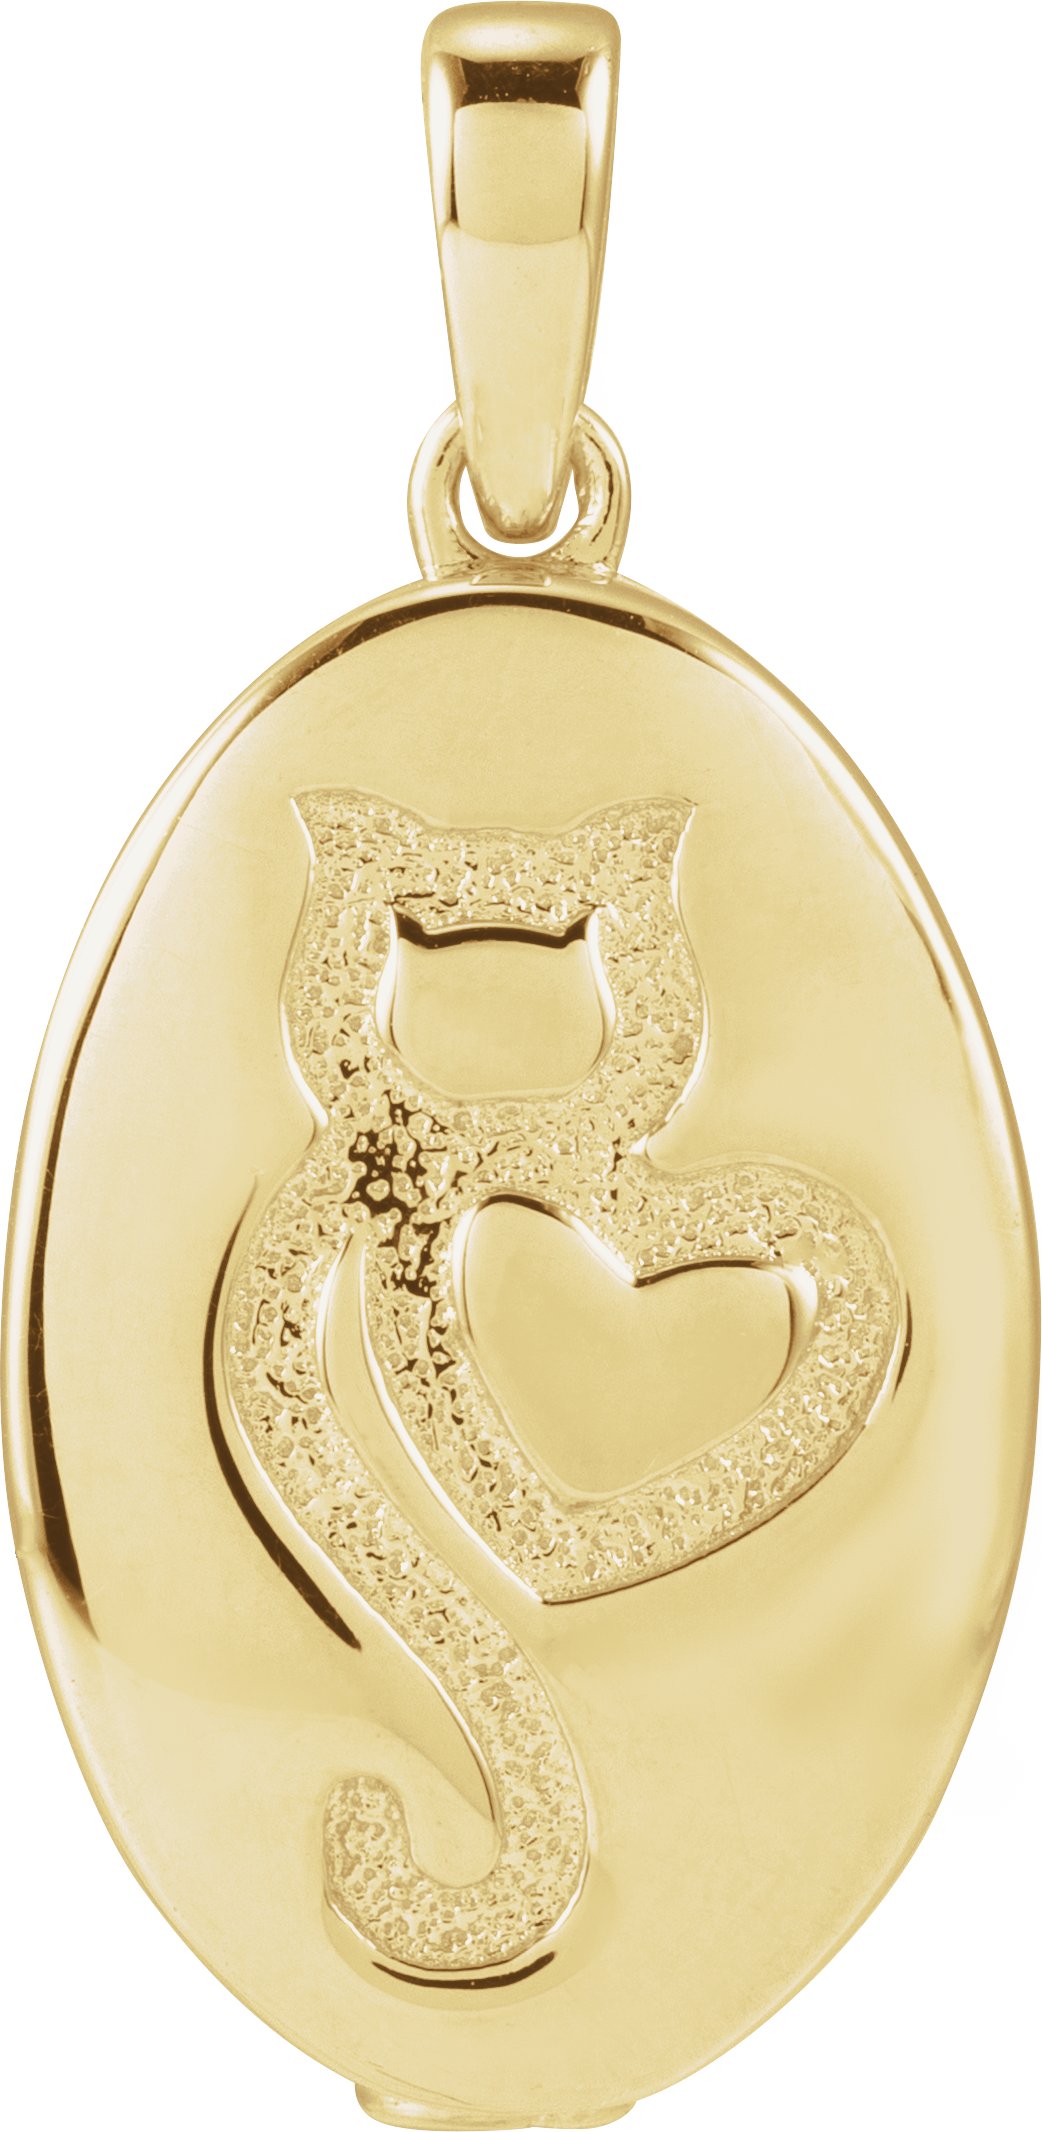 14K Yellow Gold-Plated Sterling Silver Cat Ash Holder Pendant